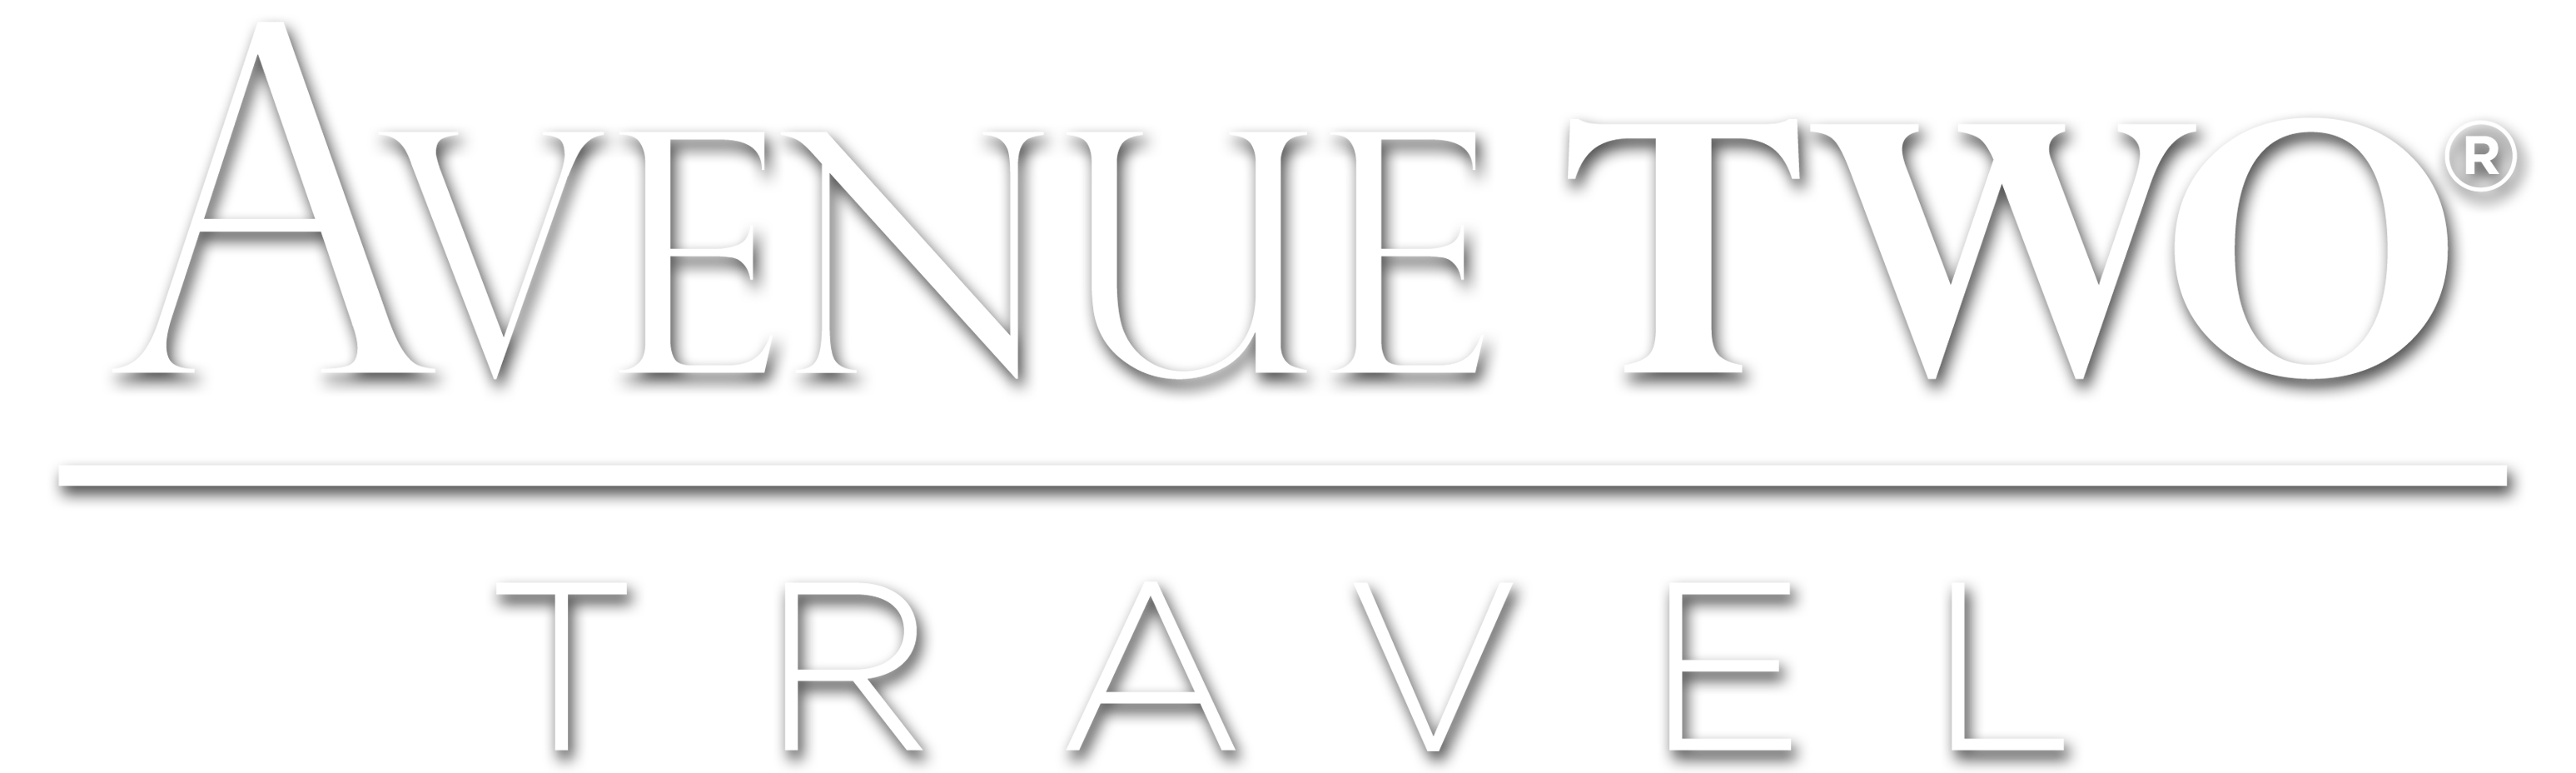 Logos for Avenue Two Travel.